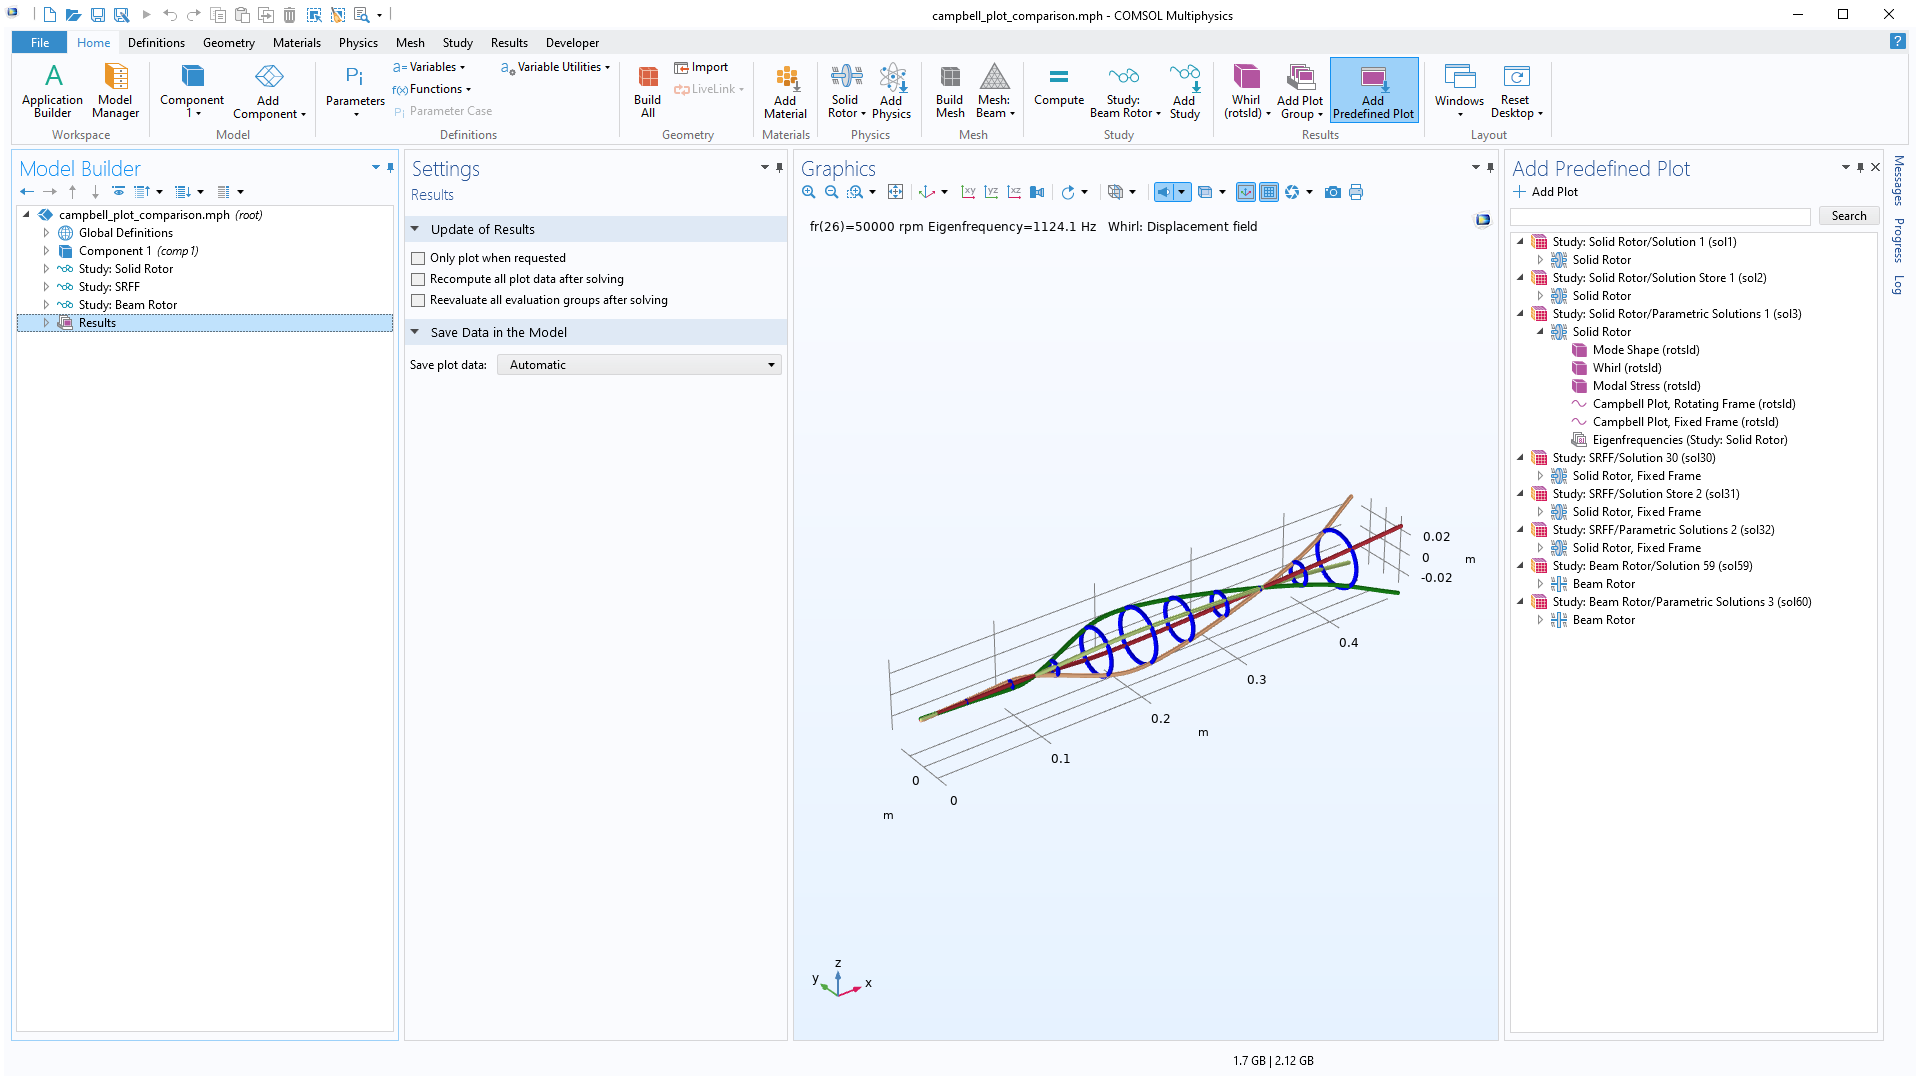 The COMSOL Multiphysics UI showing the Model Builder with the Results node highlighted, the corresponding Settings window, a Campbell plot in the Graphics window, and the Add Predefined Plot window opened on the right.